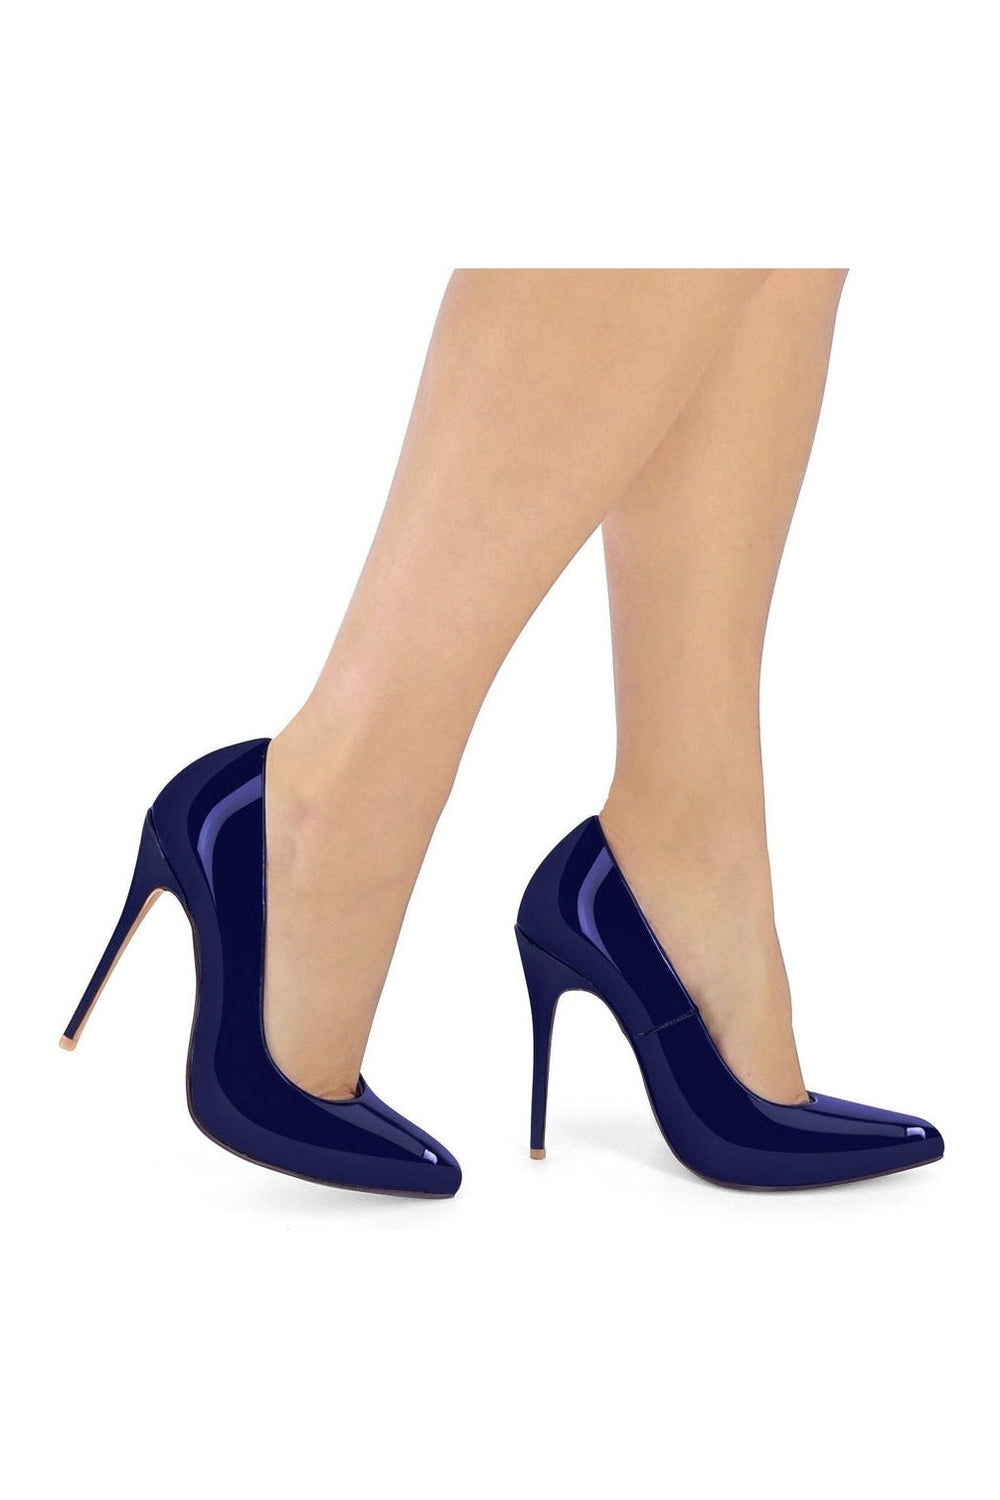 Sultry Low Cut Sky High Stiletto Heel Pump-Pumps-Sexyshoes Signature-Royal Blue-SEXYSHOES.COM